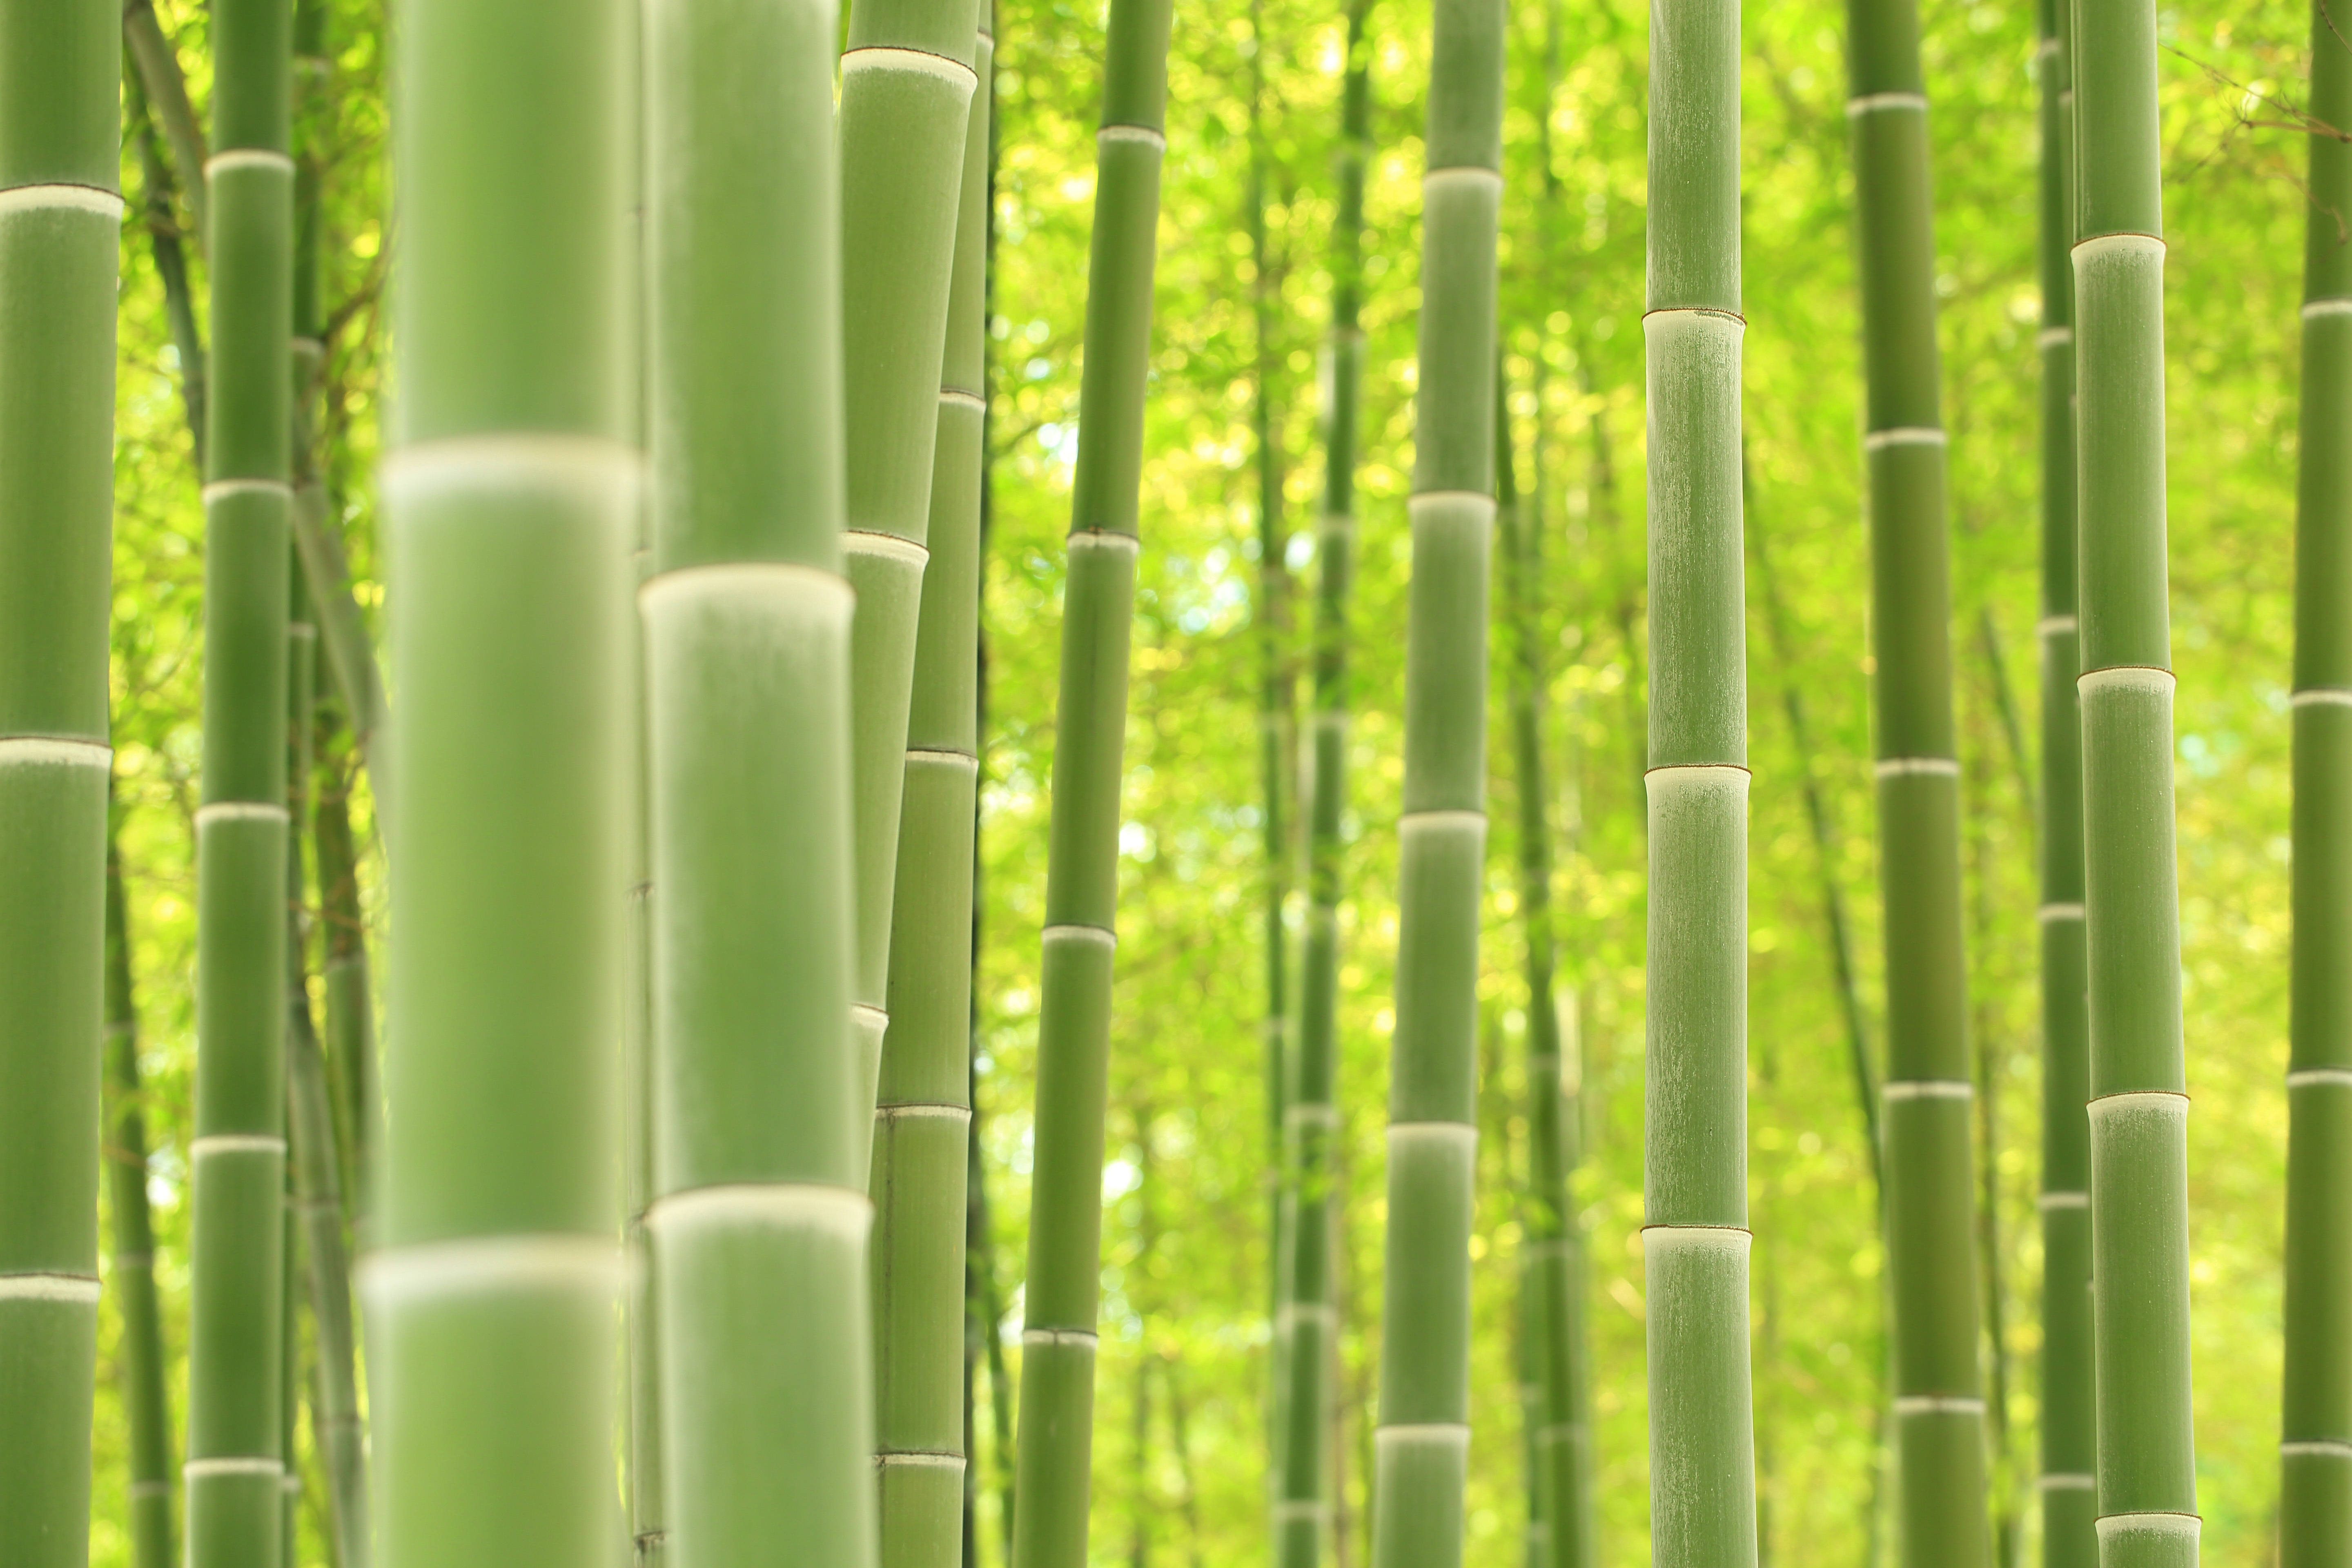 Earth Bamboo HD Wallpaper | Background Image